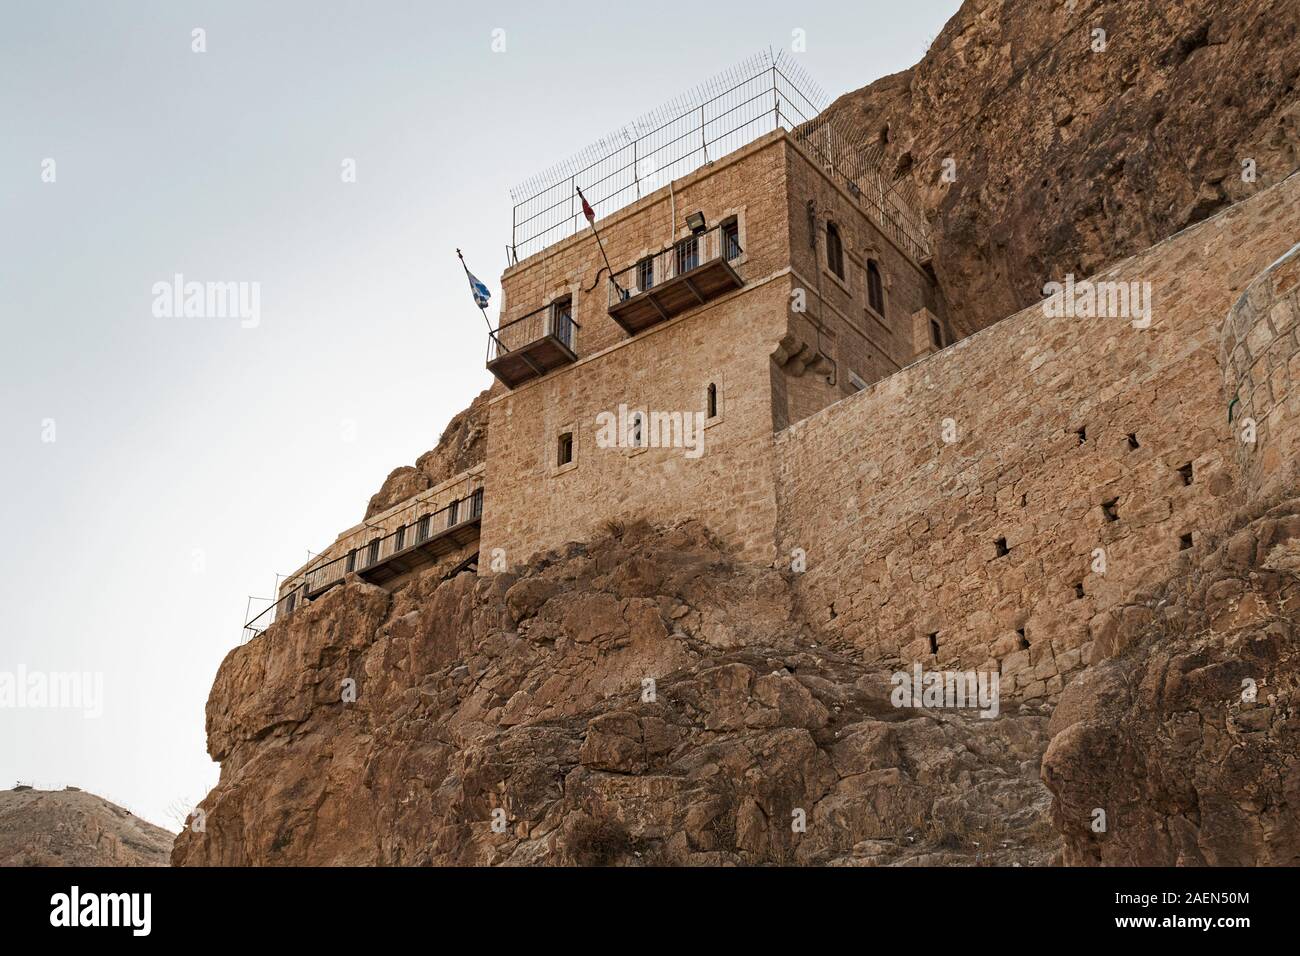 a section of the monastery of the temptation built into the rocky cliffs on the mount of temptation in ancient jericho in the west bank palestine Stock Photo